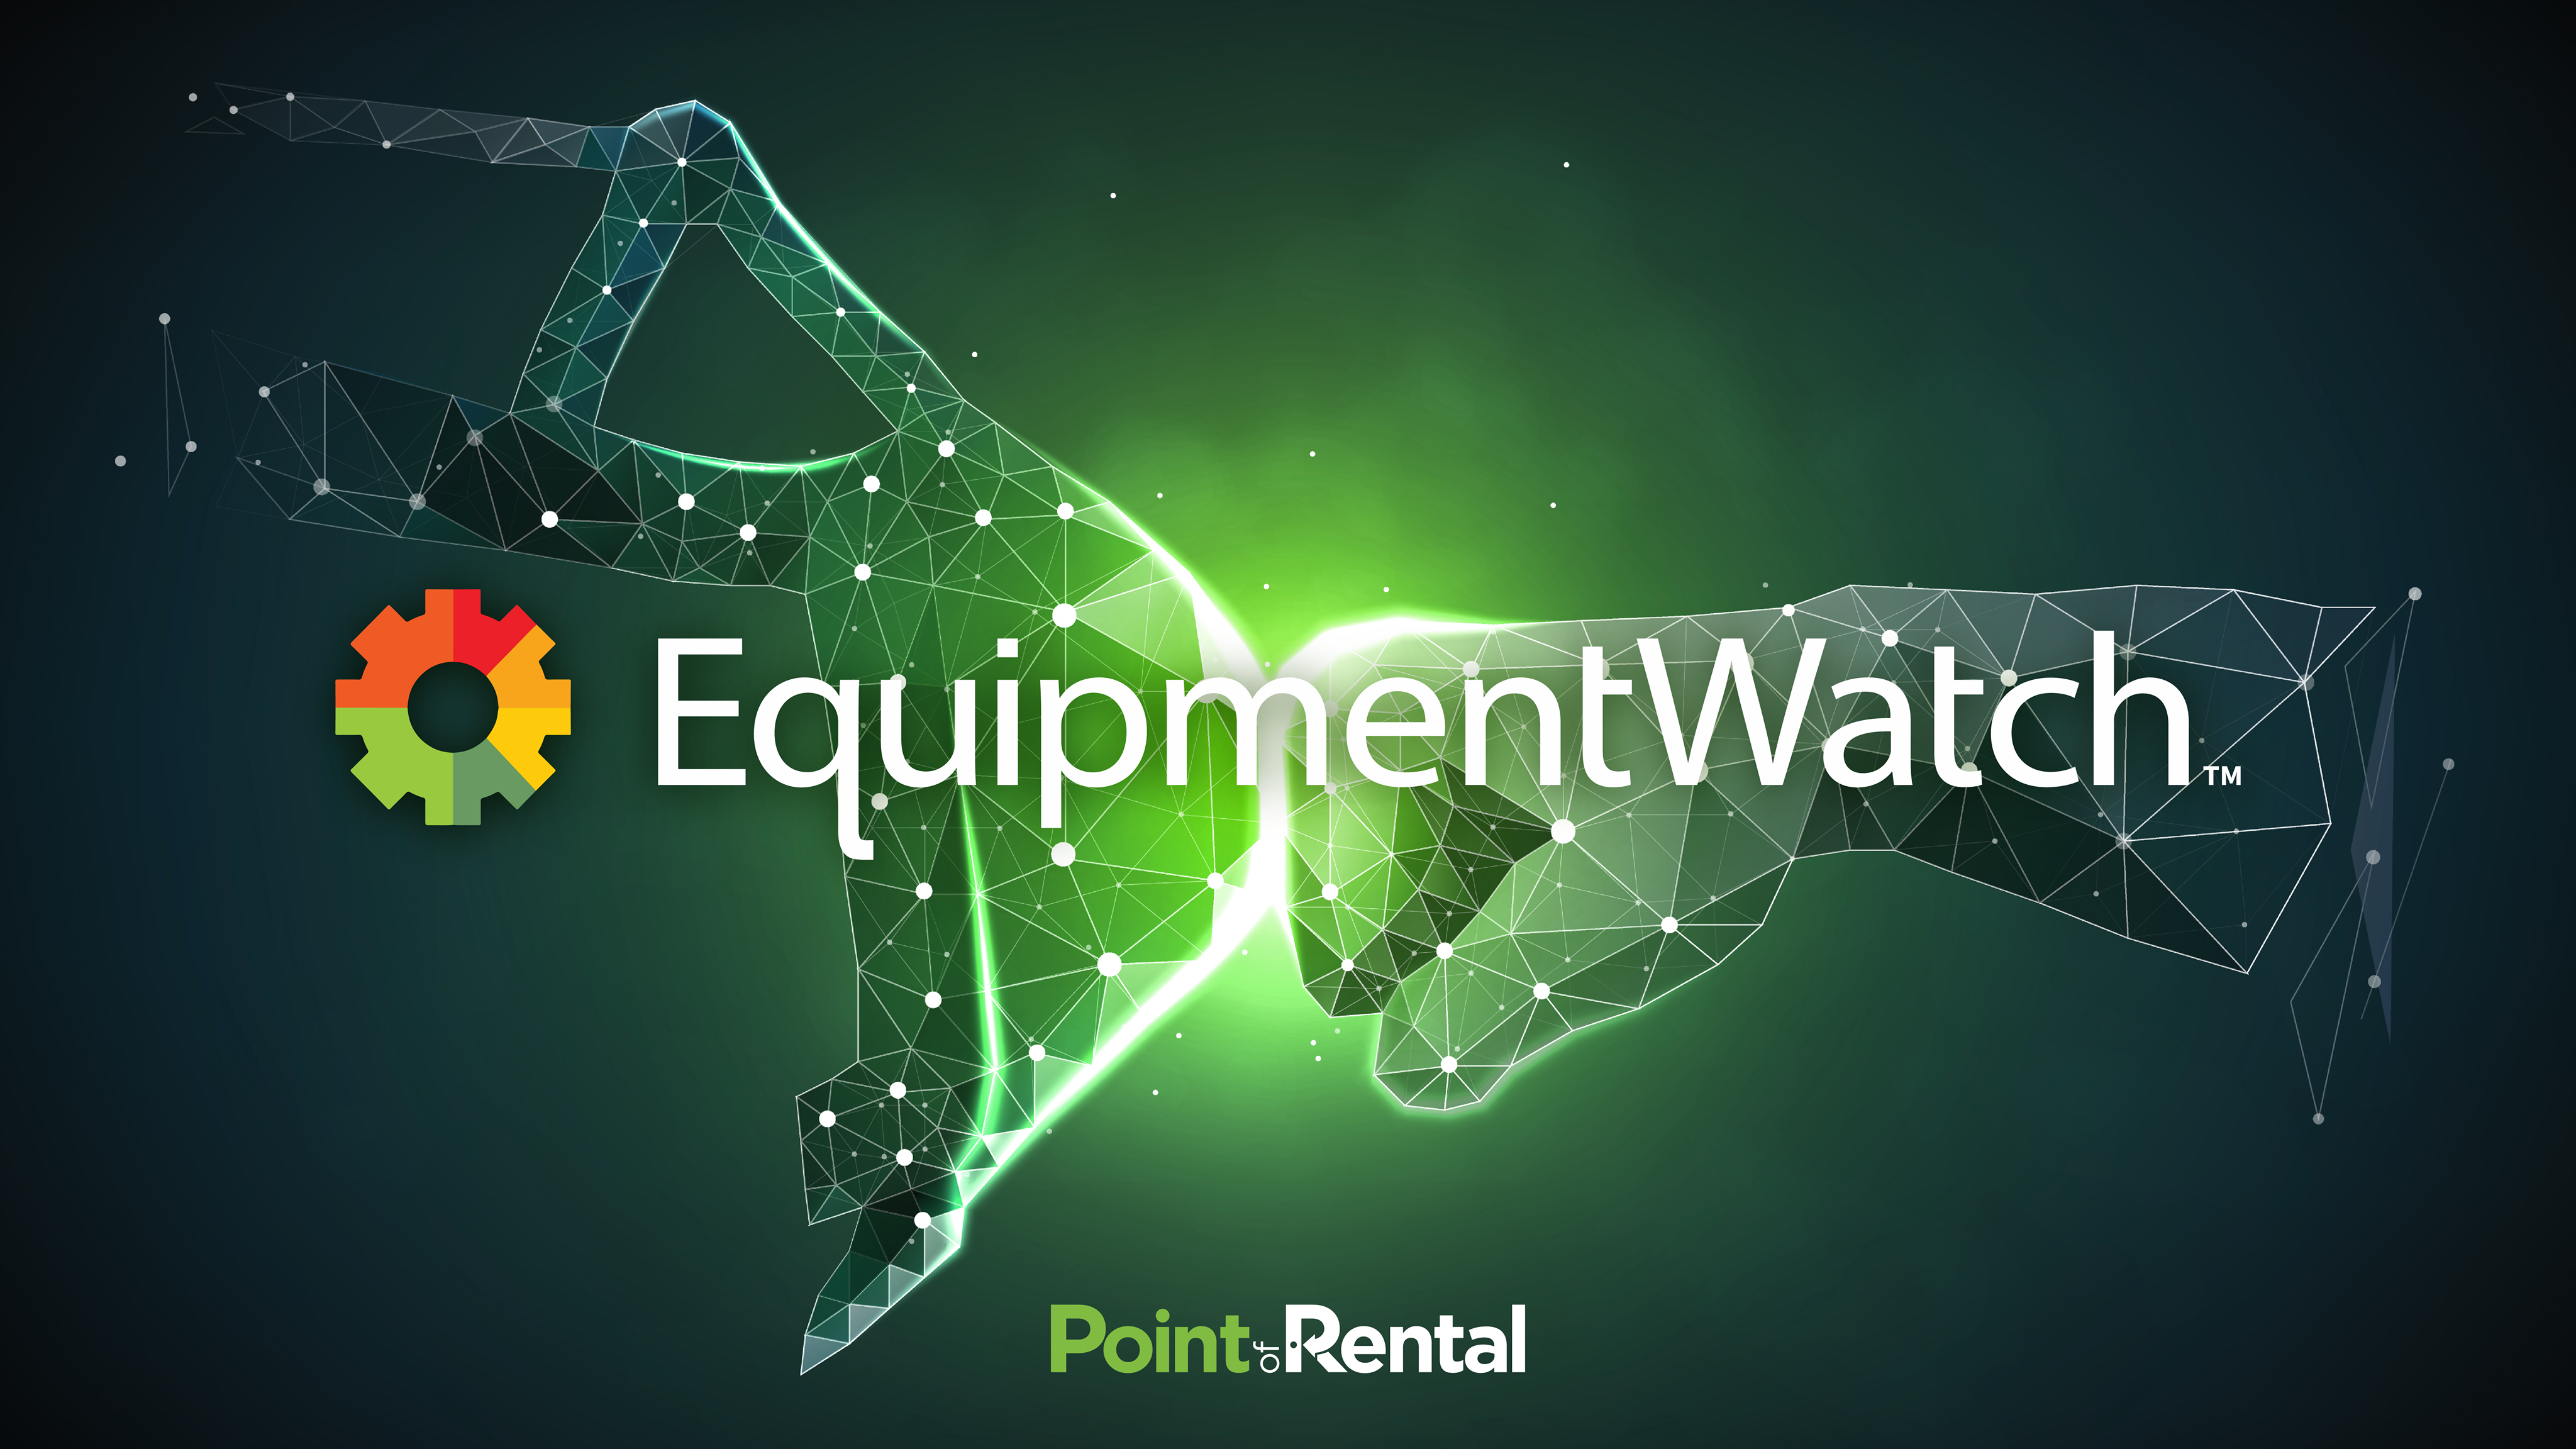 Point of Rental is now integrated with EquipmentWatch.